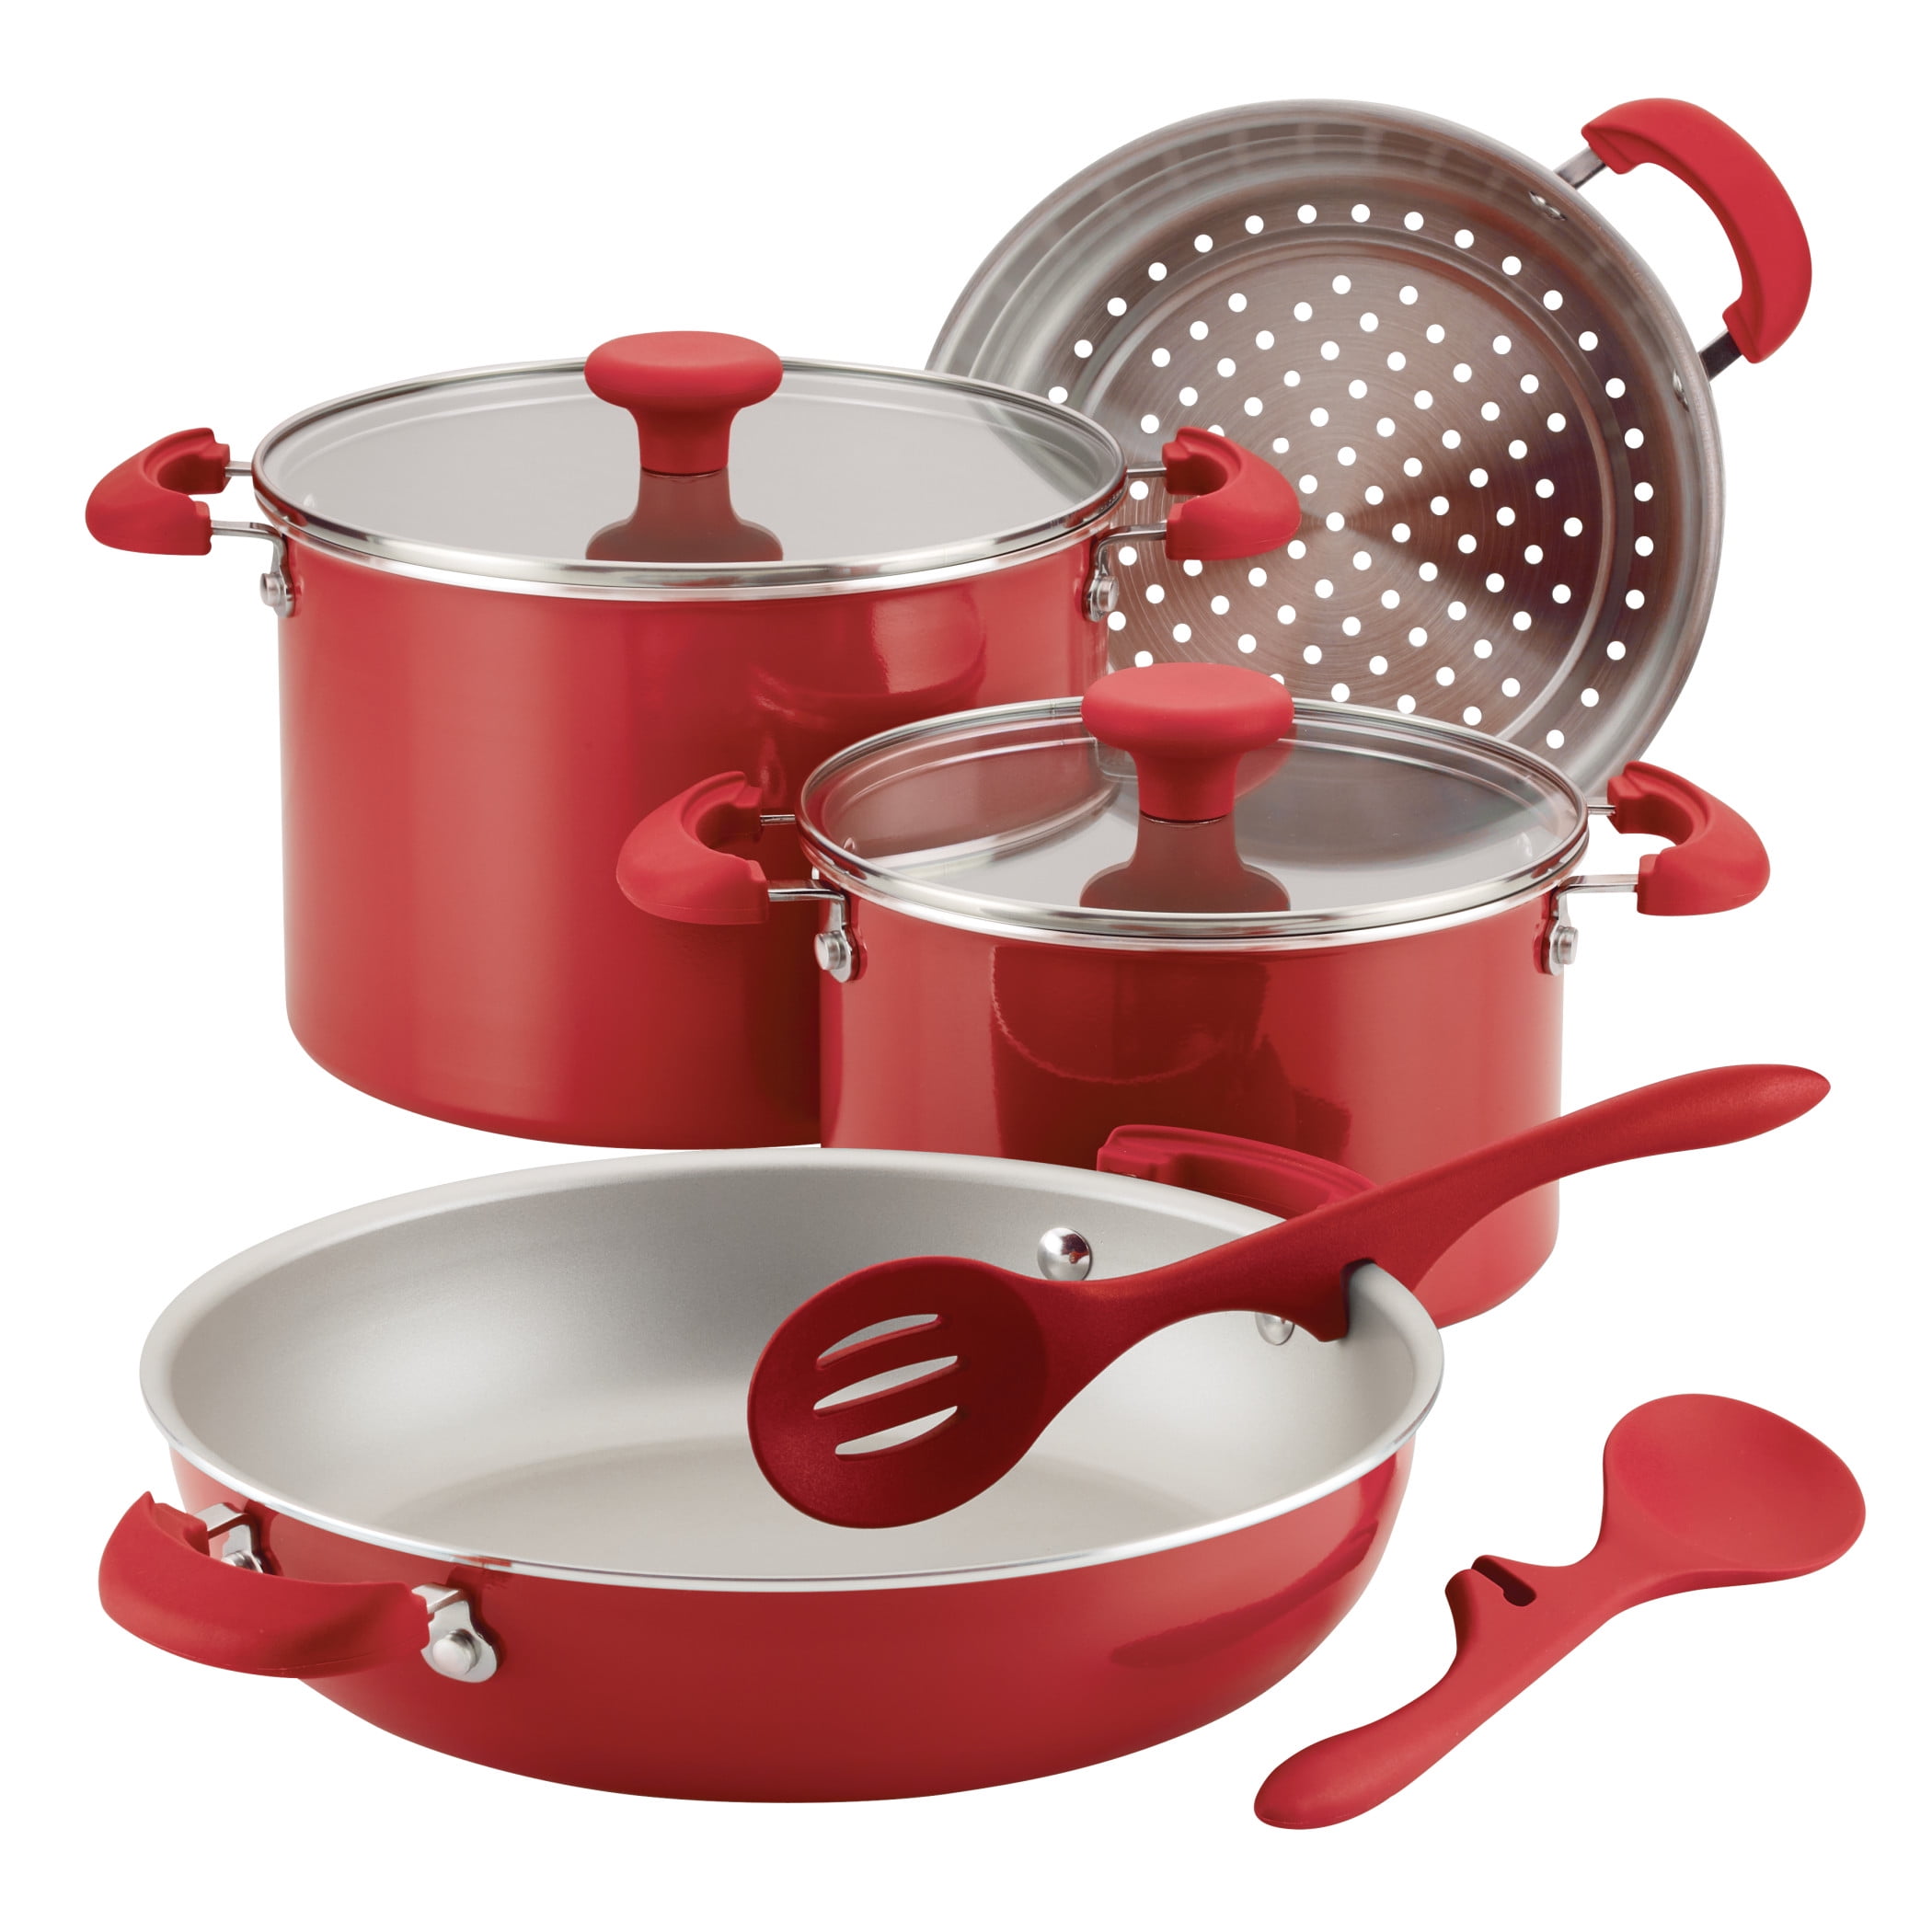 Our Complete Cookware Set Has Everything You'll Need For Healthy Cooking In  Your Kitchen!☀️☀️ imarku red pots and pans set ​is the perfect…